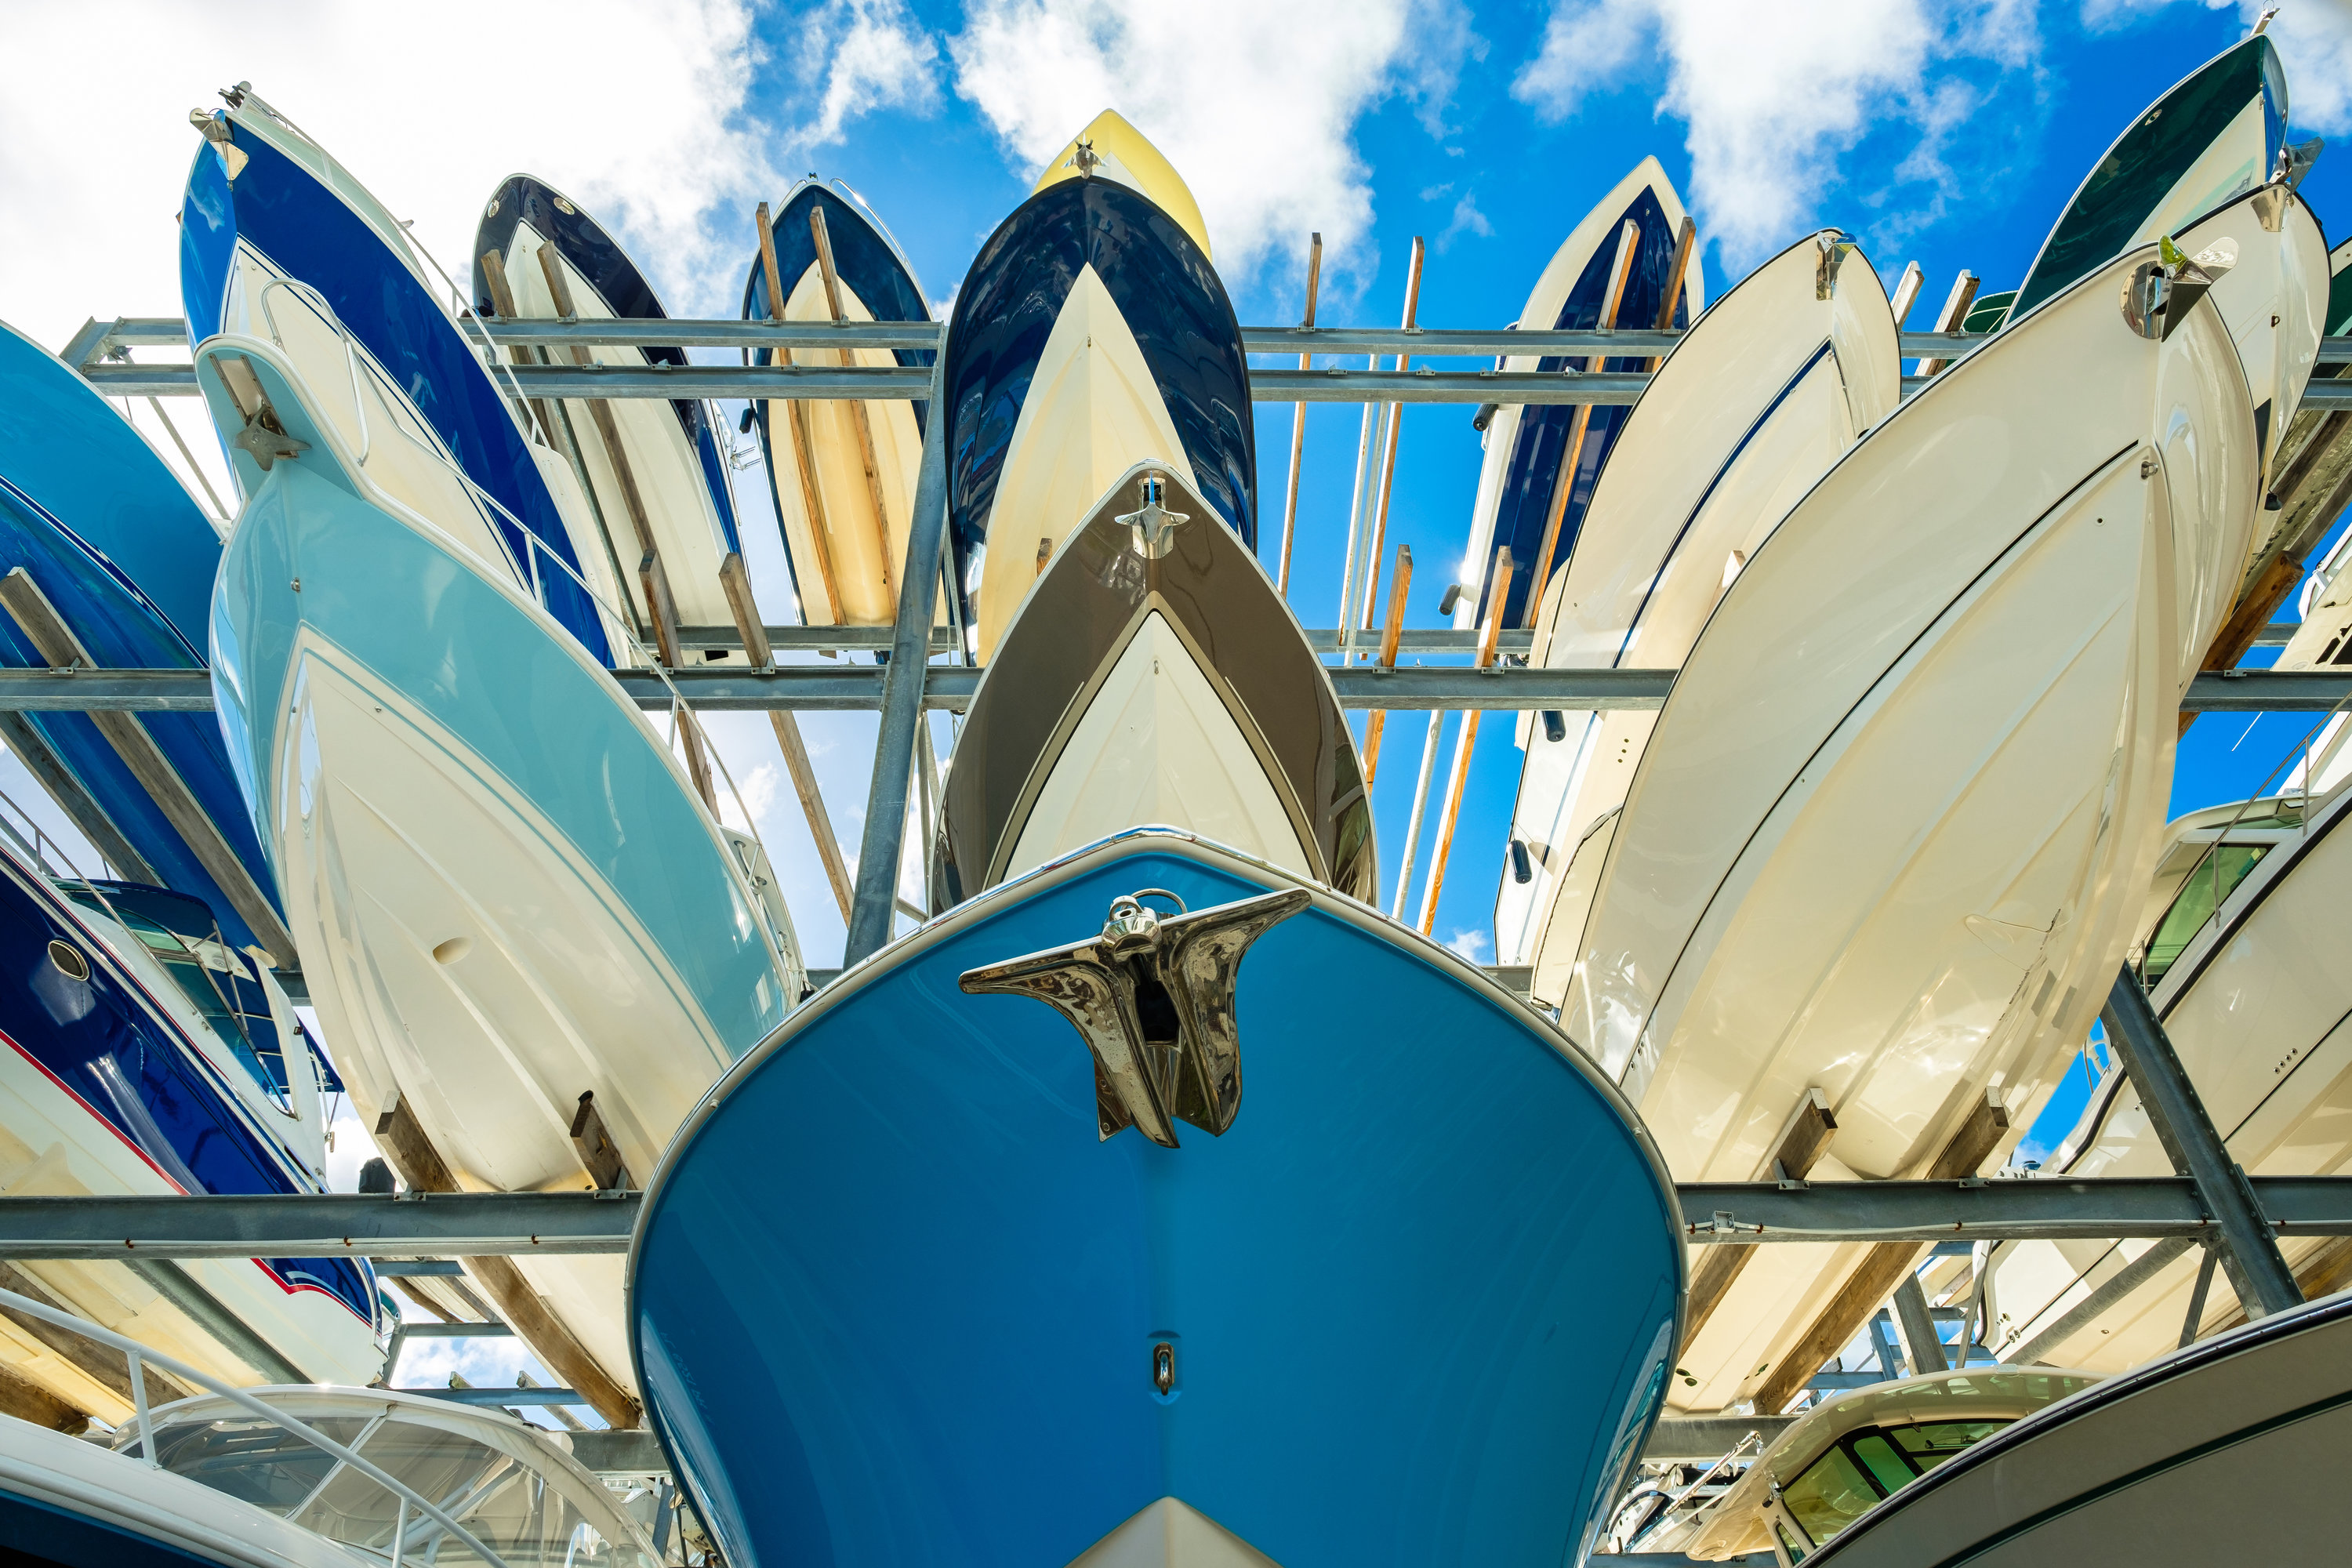 Boats stacked in a outdoor storage facility.